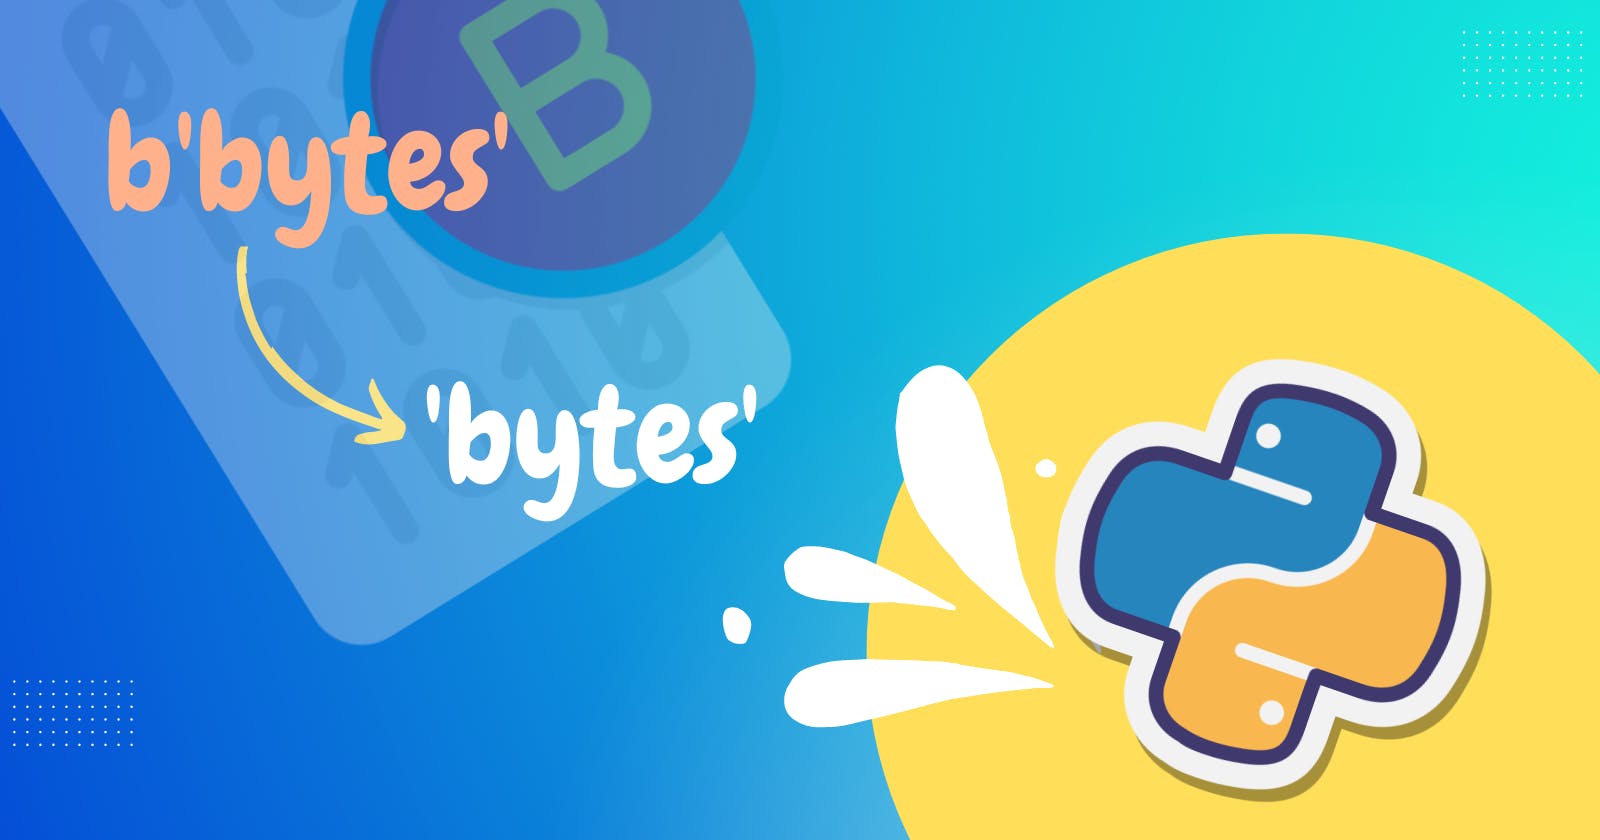 How To Convert Bytes To A String - Different Methods Explained